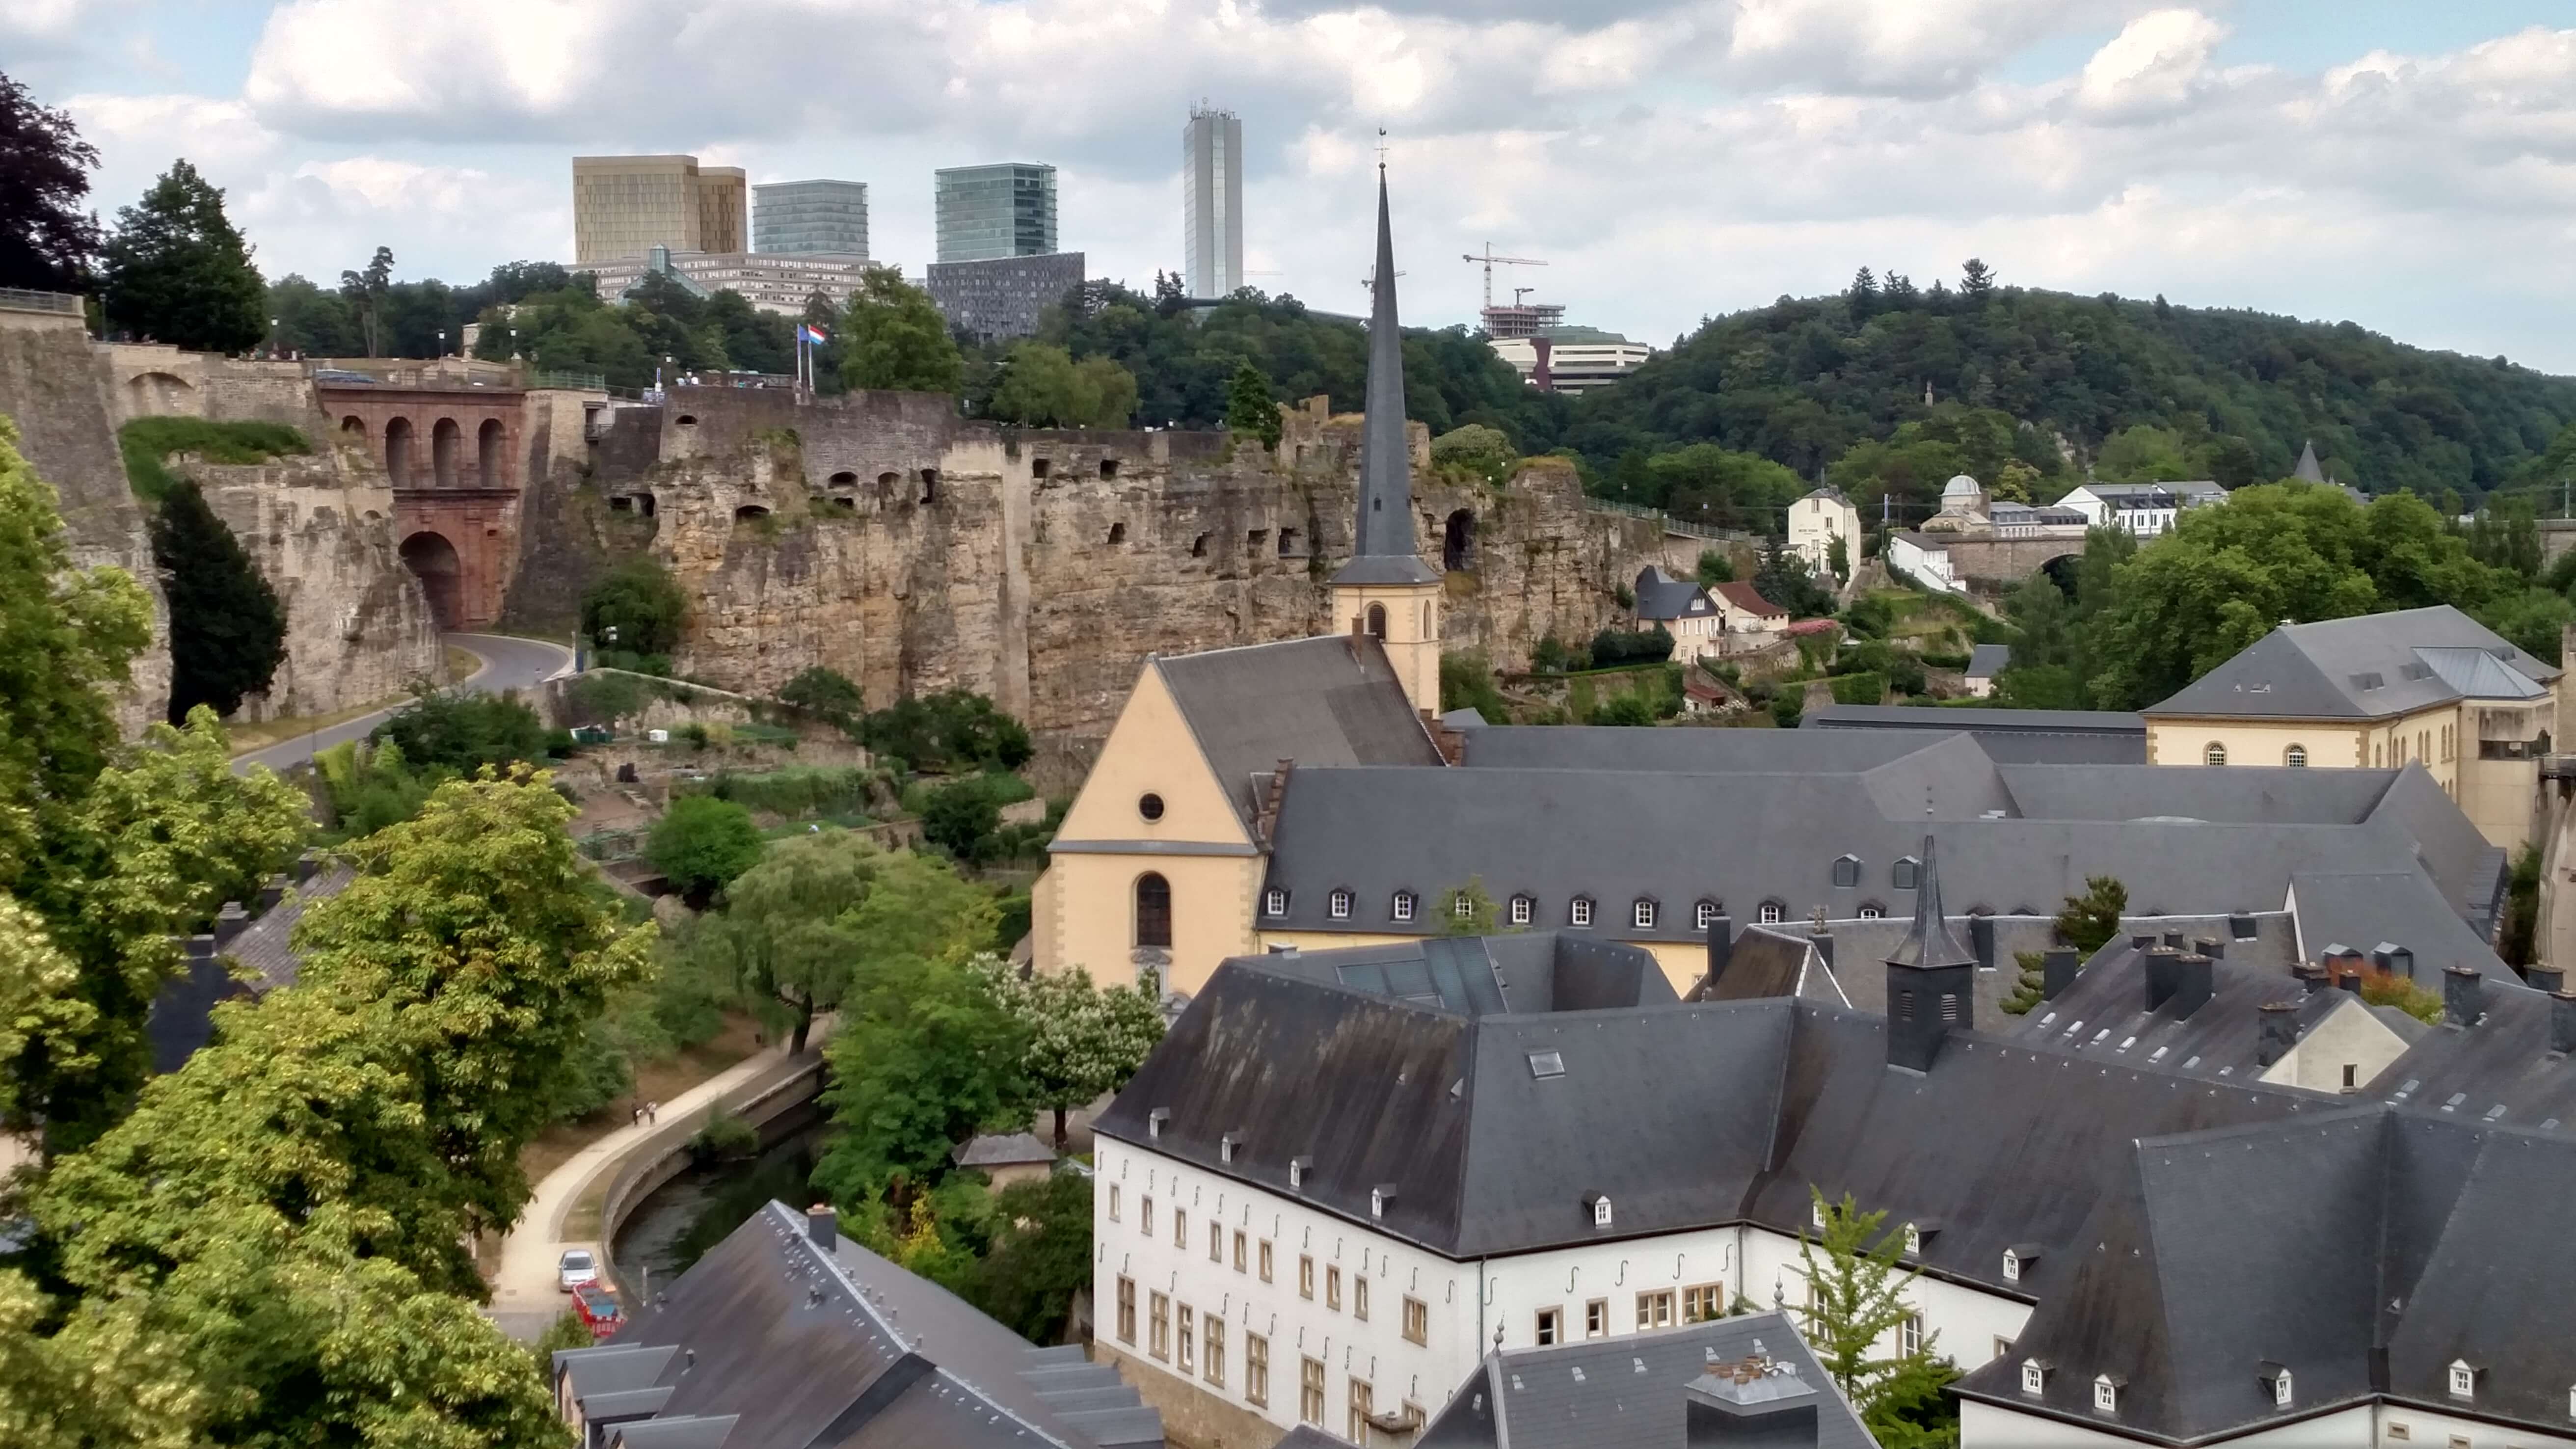 Luxembourg City – A Delightful Mix of Old and New